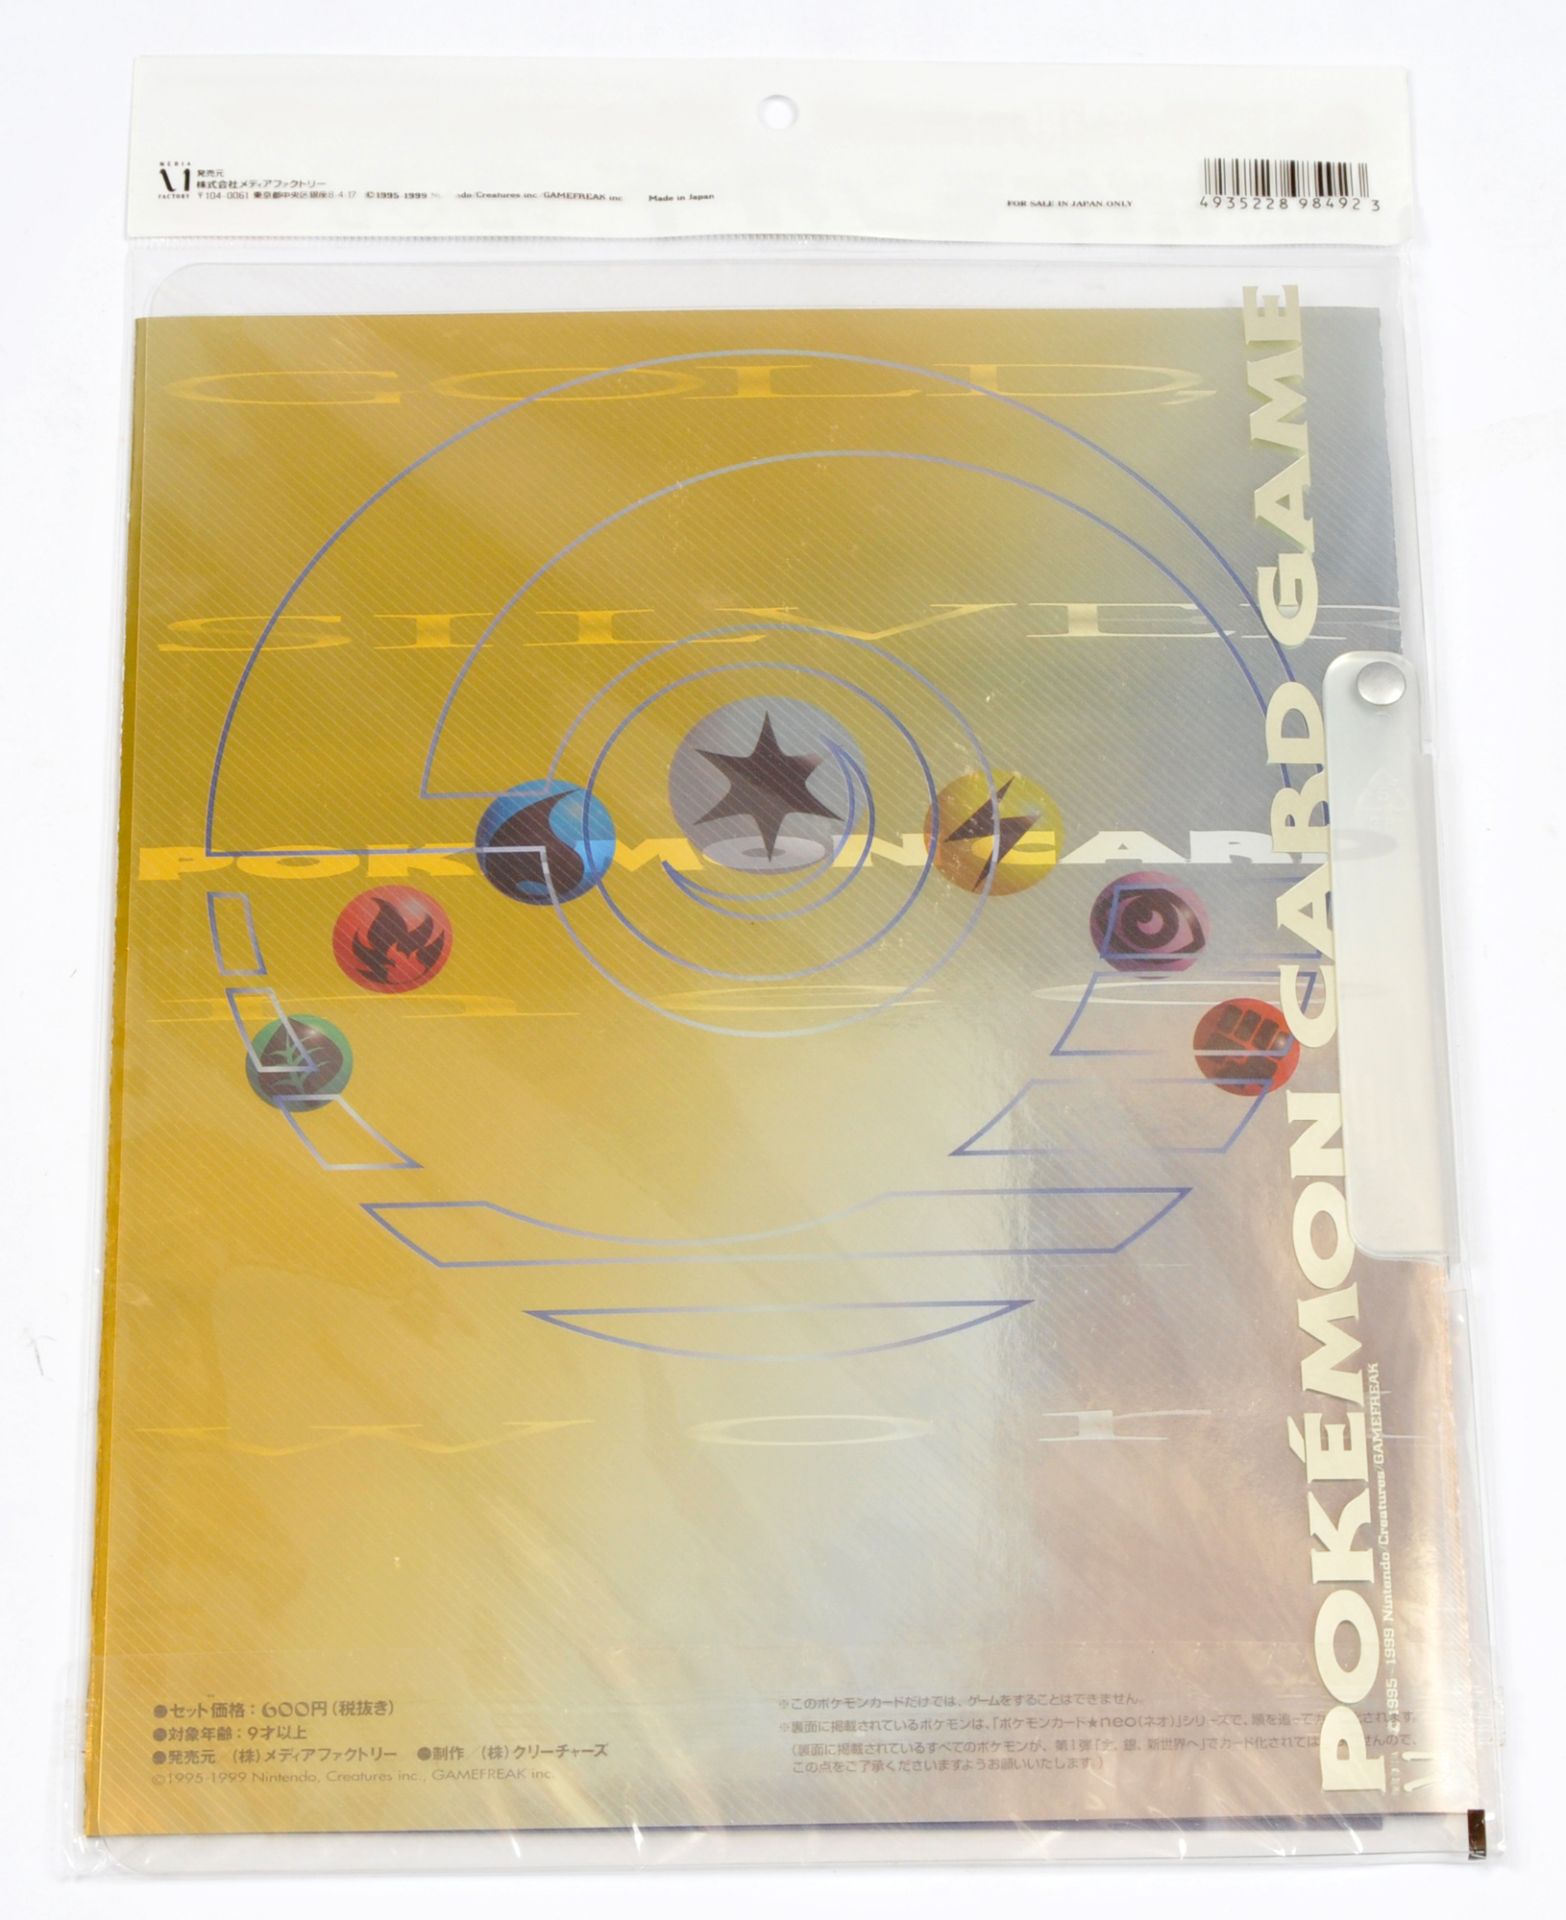 Japanese Pokemon Card Neo Gold and Silver Release Commemorative Premium File - Image 2 of 2